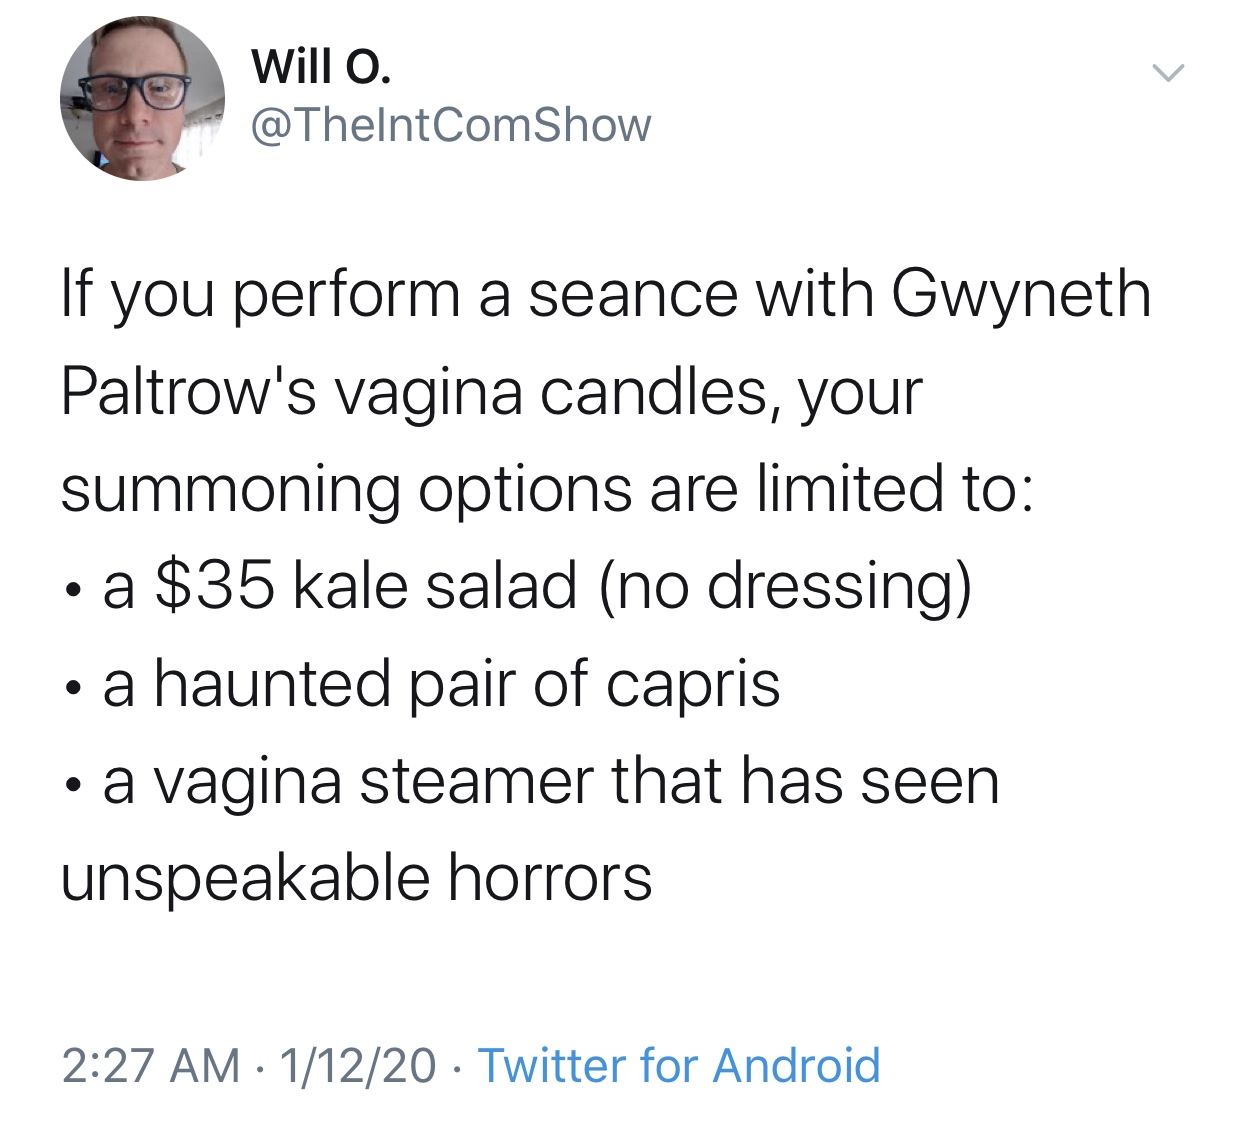 we need business majors to guillotine - Will o. Show If you perform a seance with Gwyneth Paltrow's vagina candles, your summoning options are limited to a $35 kale salad no dressing a haunted pair of capris a vagina steamer that has seen unspeakable horr